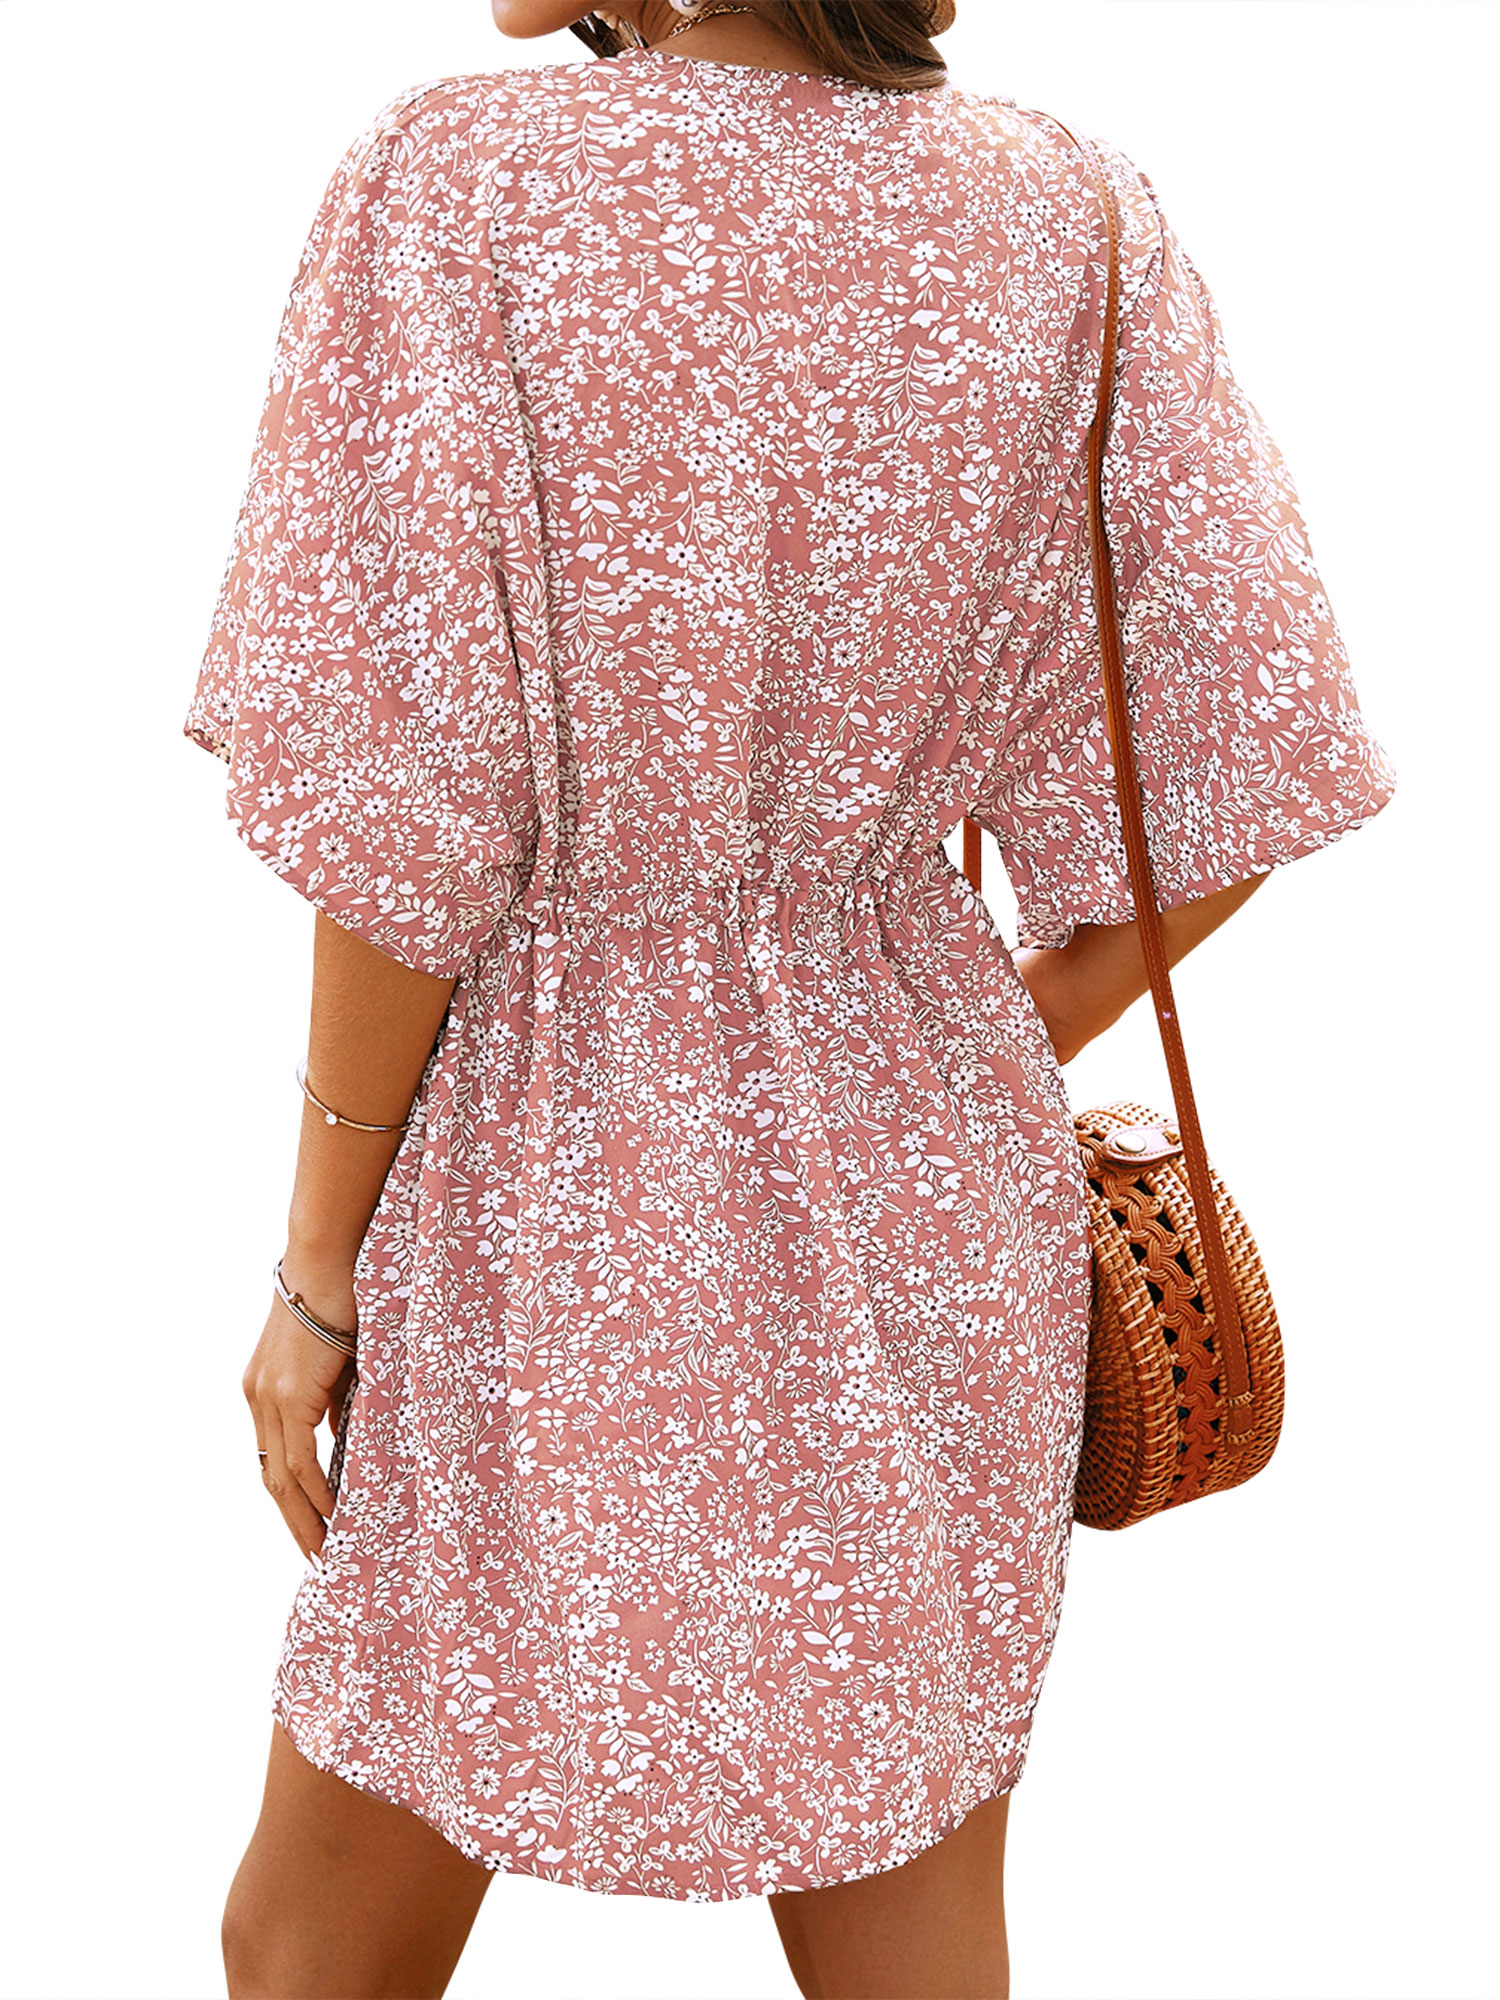 ZXZY Women Floral Printed Buttons Tie Waist Short Sleeves Mini Dress - image 5 of 12